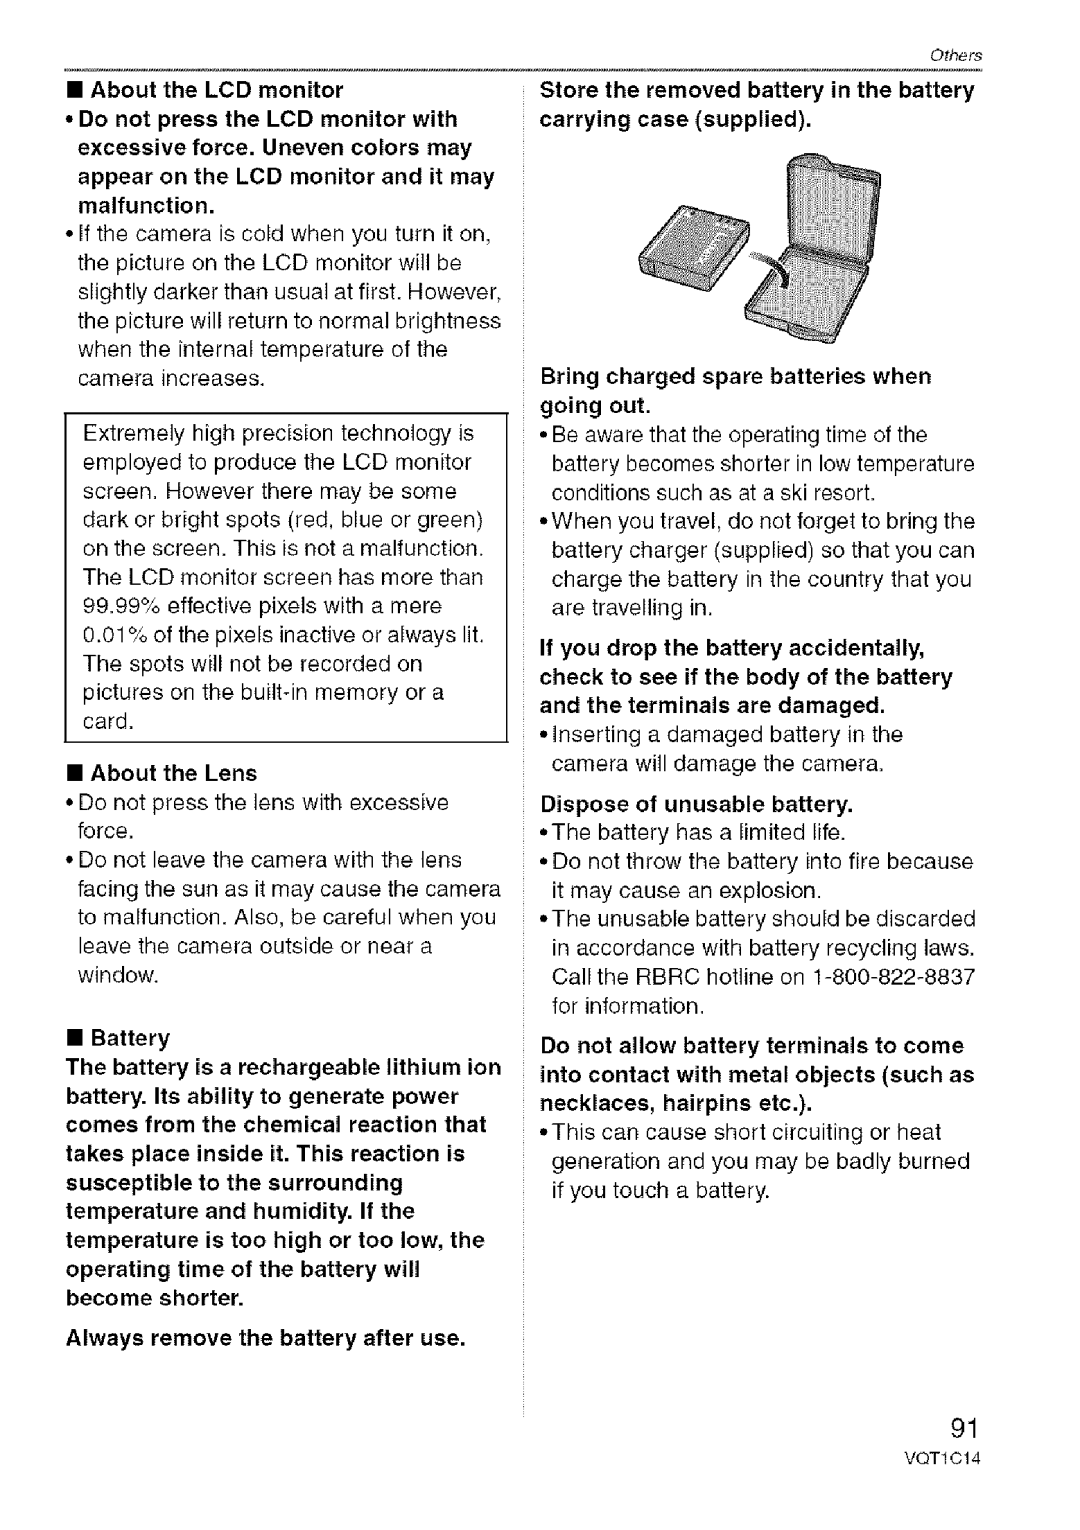 Panasonic DMC-FX10, DMC-FX12 operating instructions About the Lens, Dispose of unusable battery 